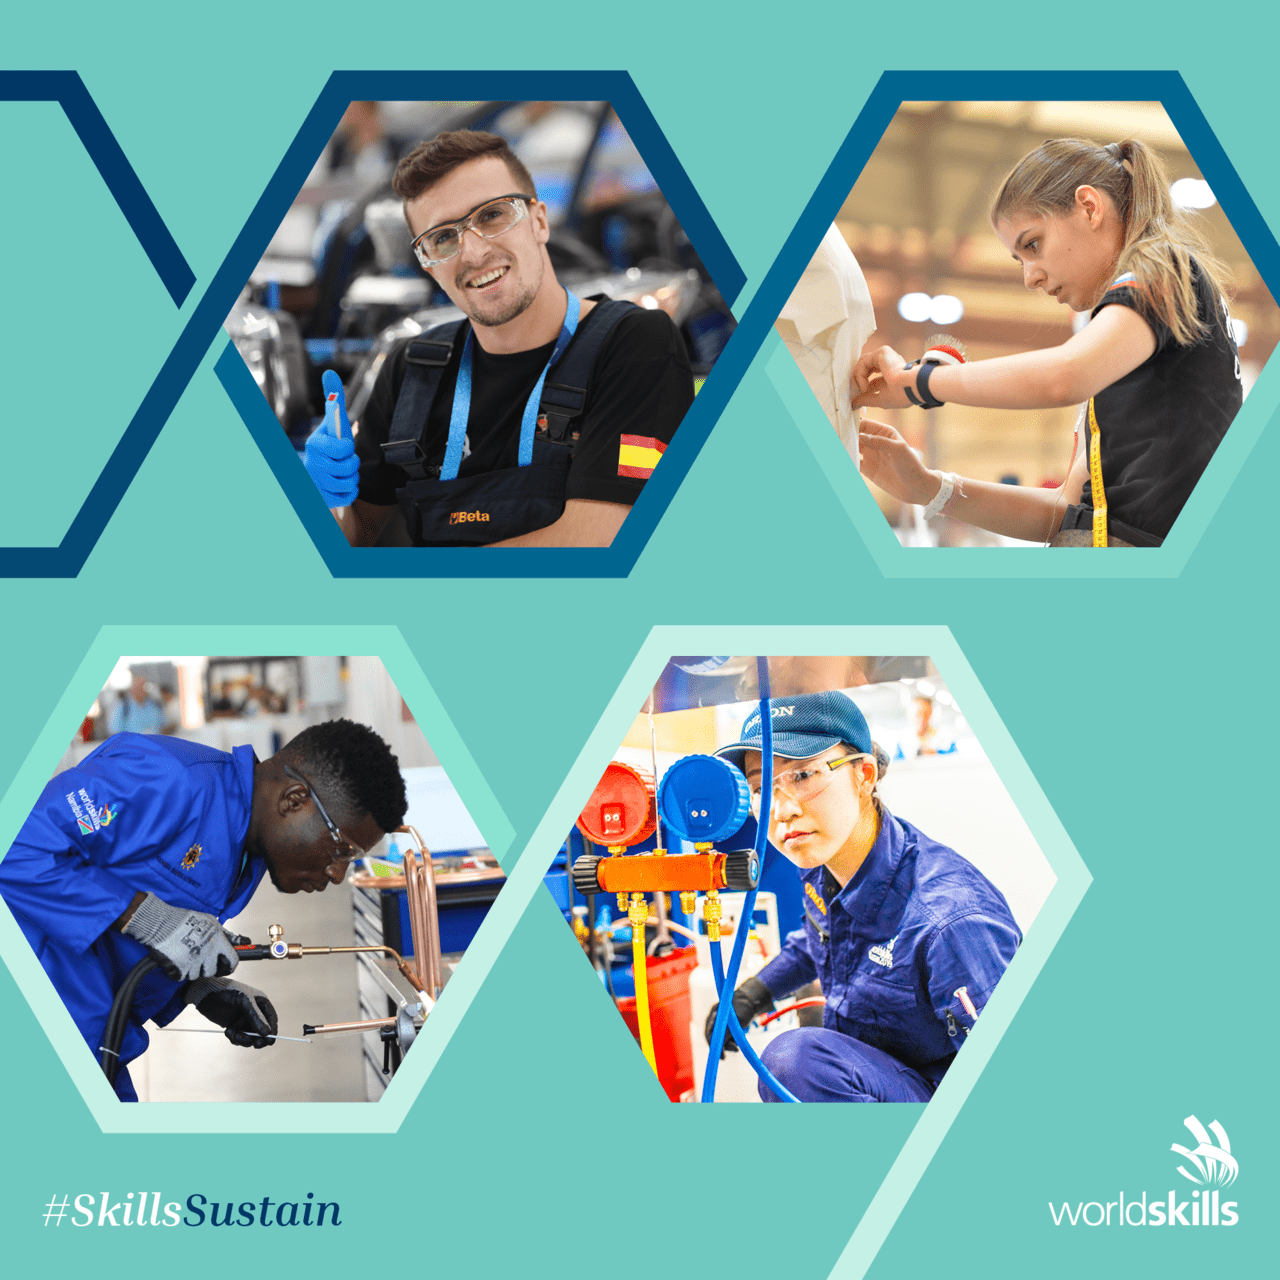 A promotional image for WorldSkills content theme in April 2021 - #SkillsSustain on the importance of sustainability as a concern for everyone.